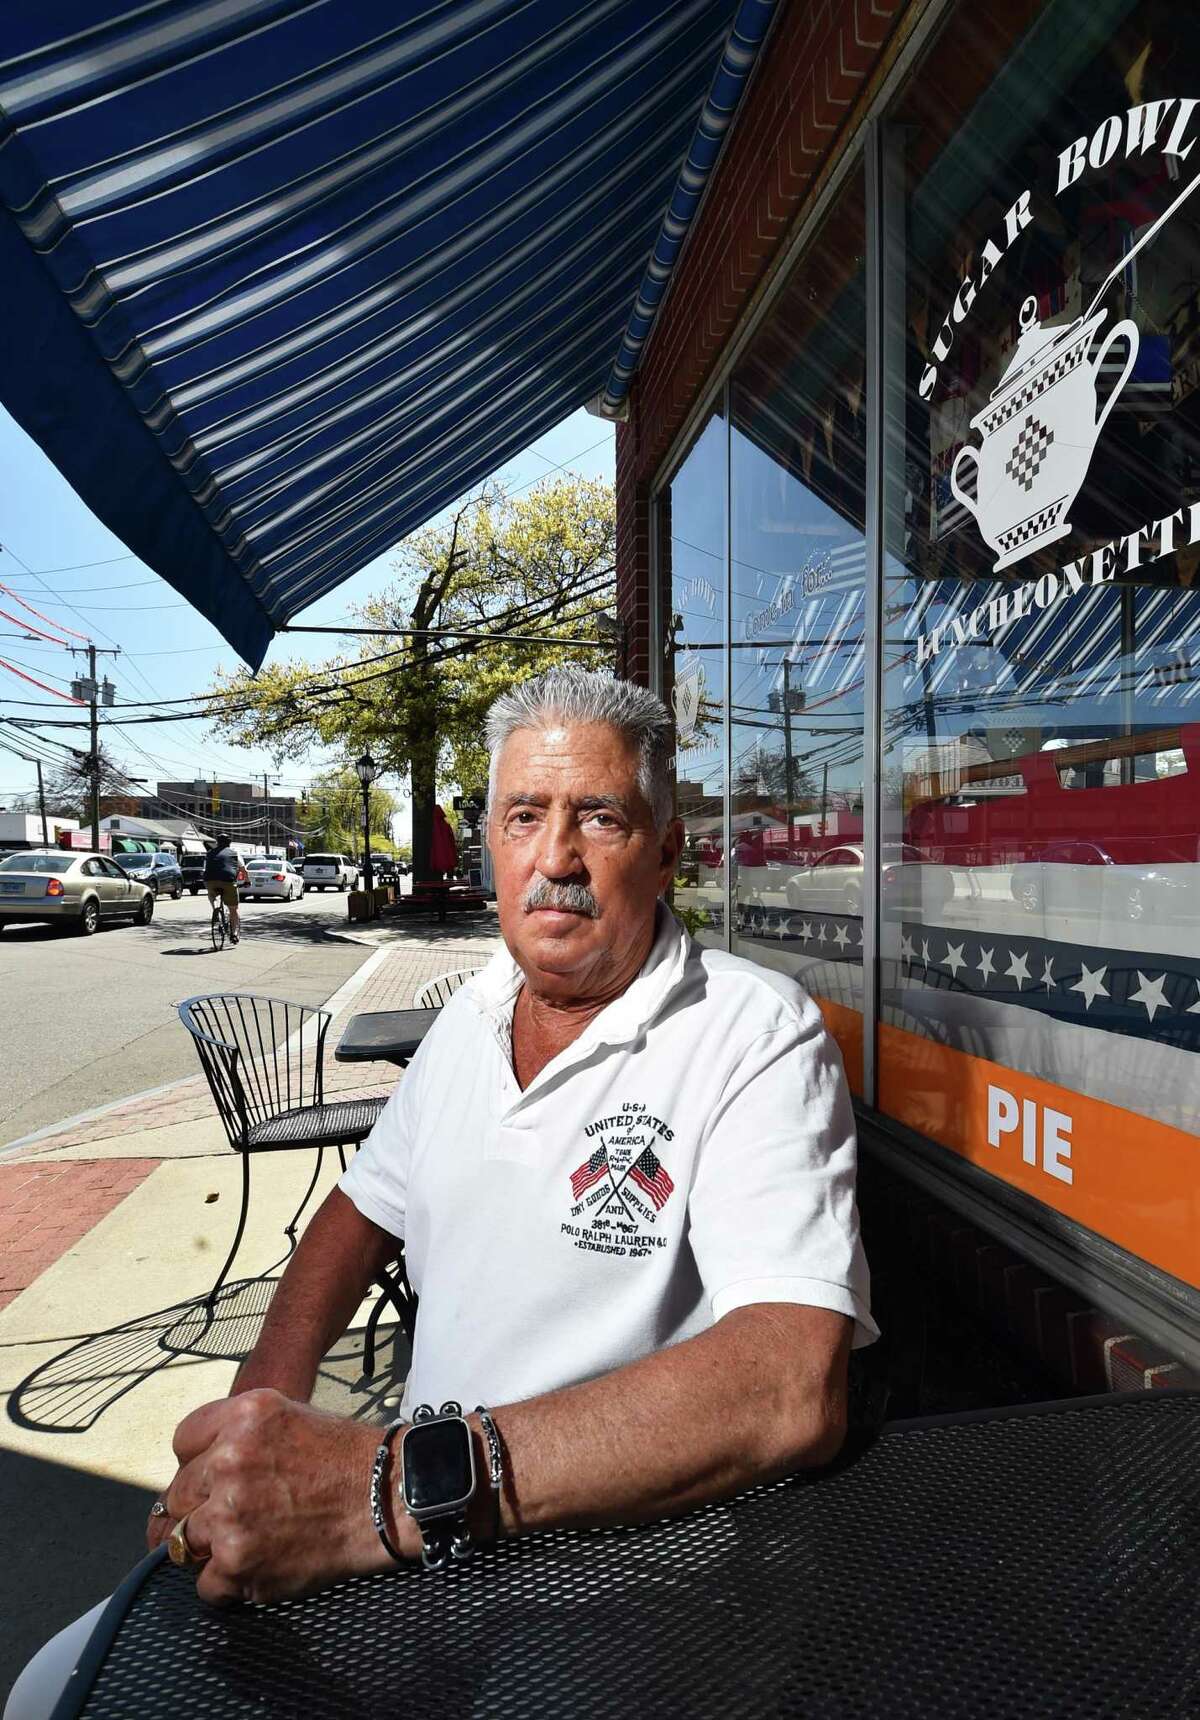 Owner Bobby Mazza poses at Sugar Bowl Luncheonette in Darien, Conn., on Tuesday May 10, 2022. The popular luncheonette will transfer ownership in late June after Mazza retires.